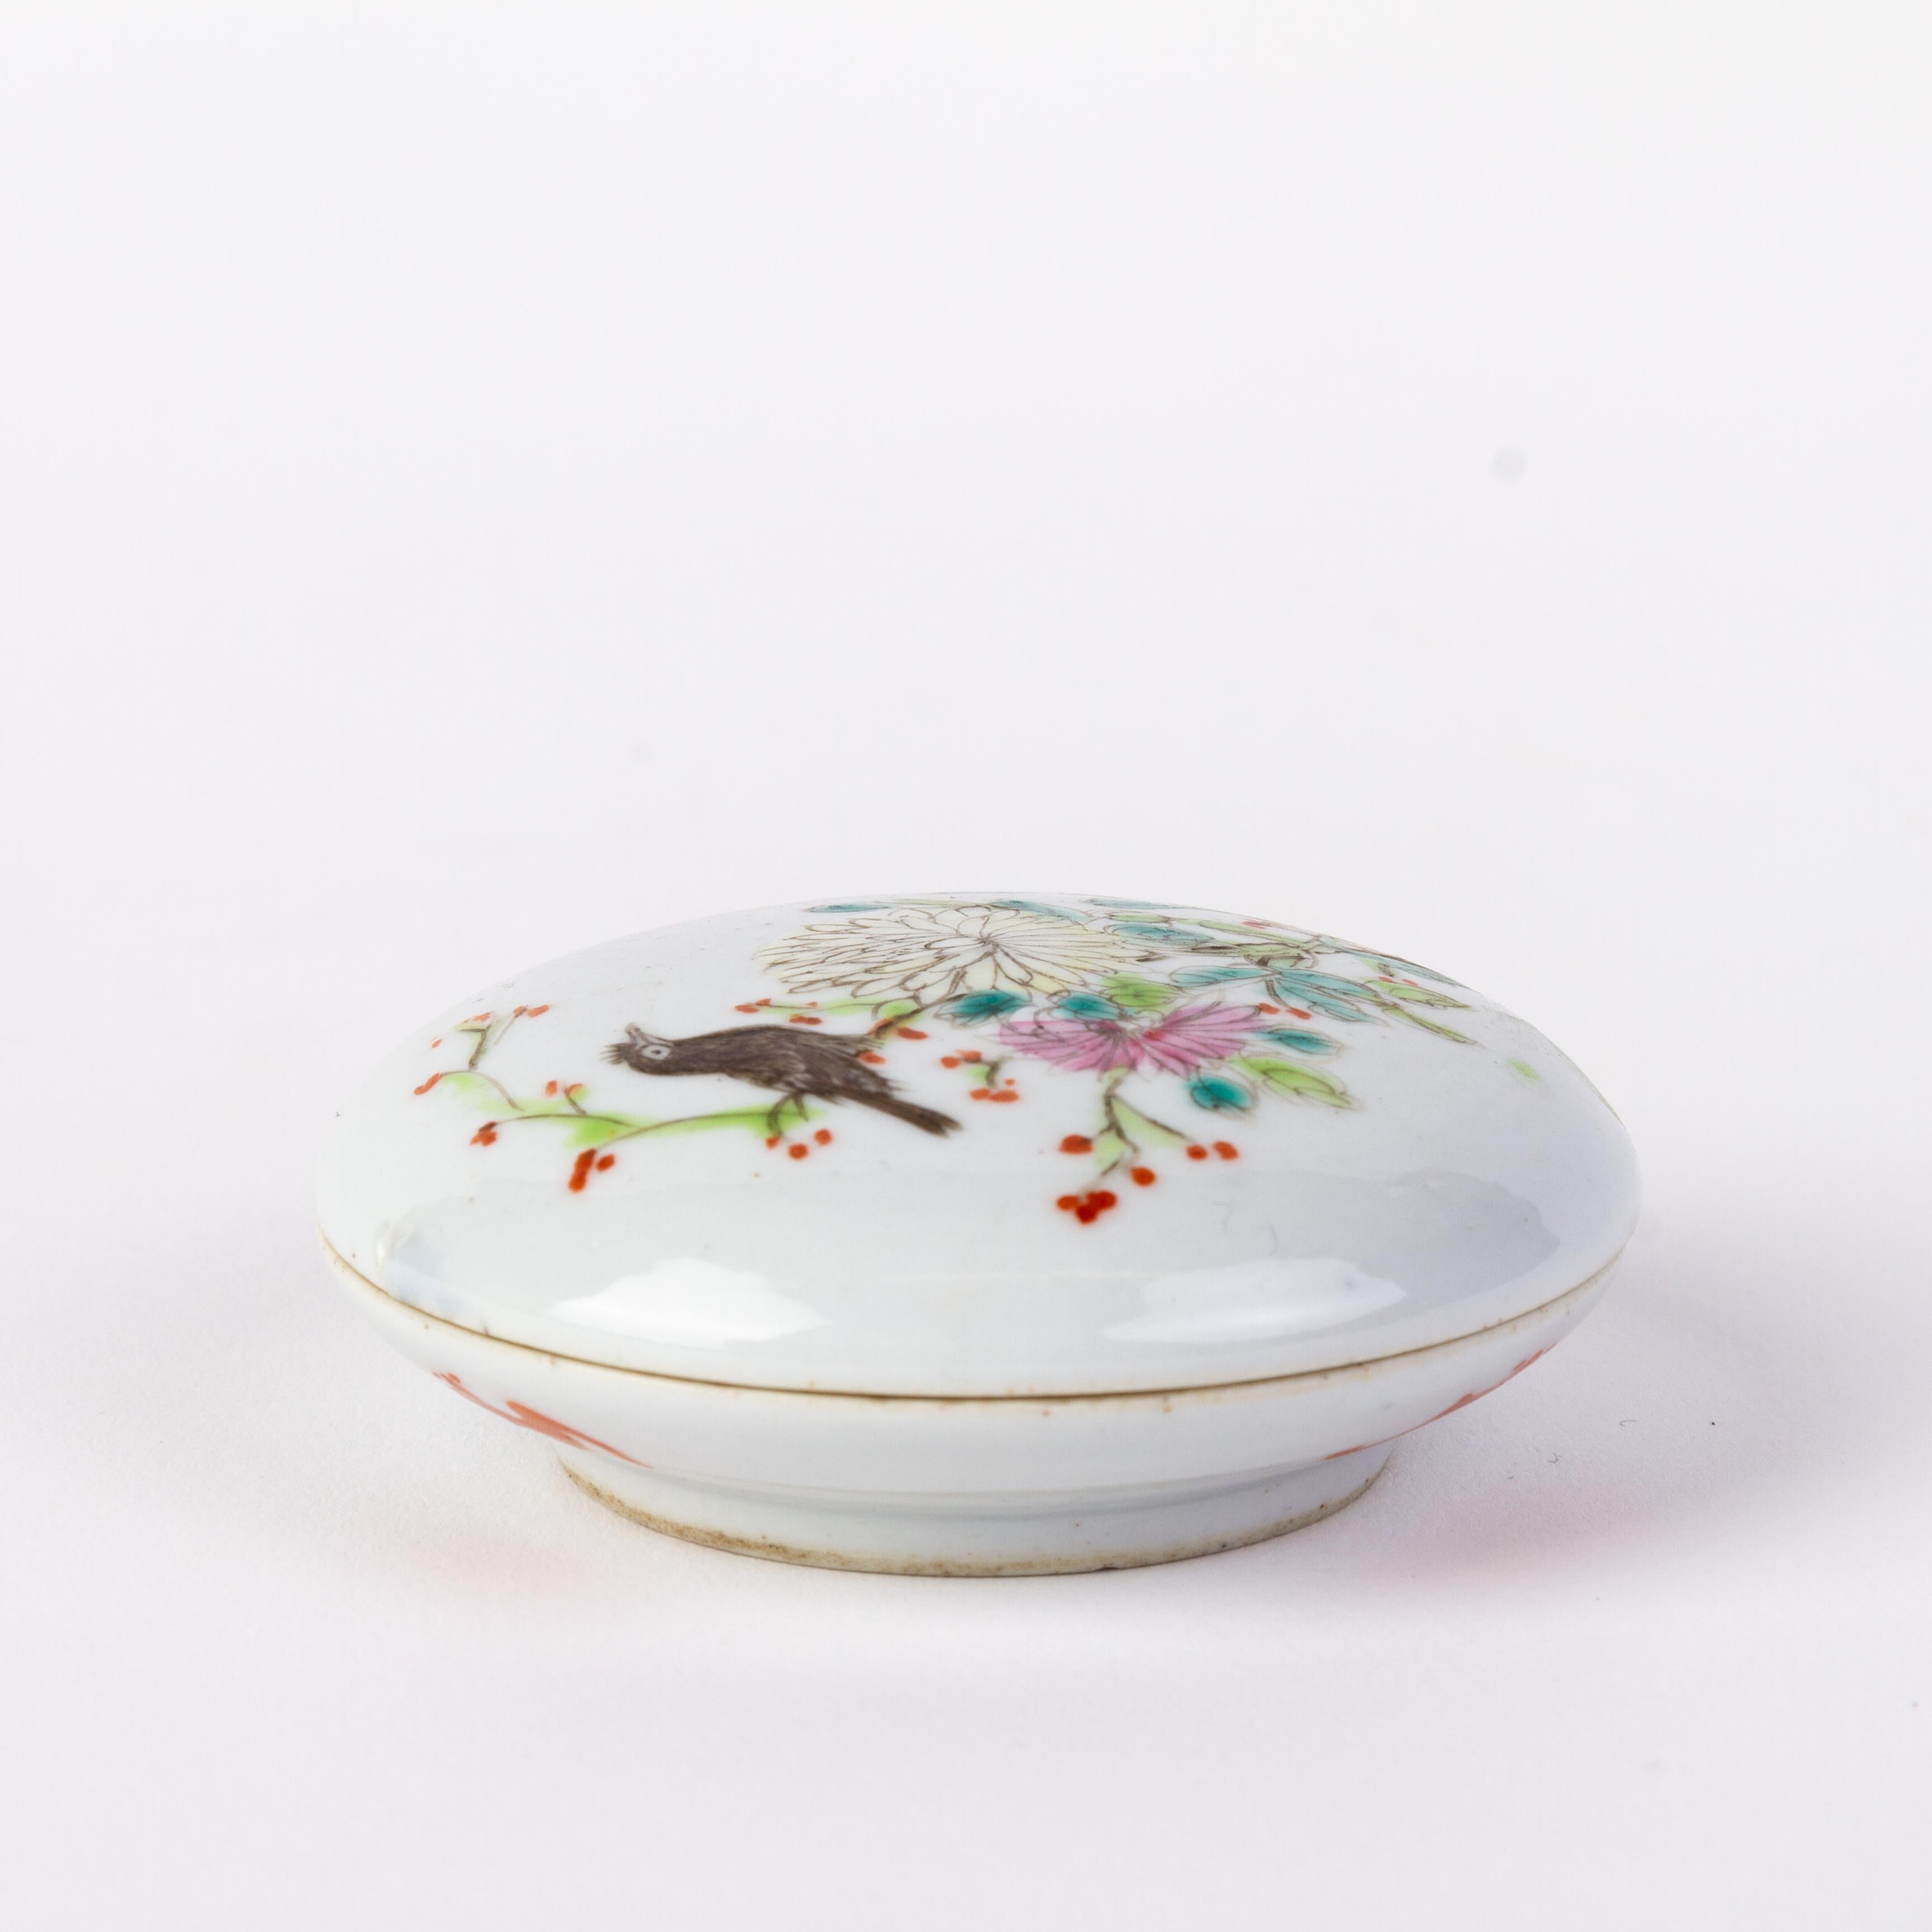 Chinese Guangxu Famille Rose Porcelain Lidded Paste Box 19th Century 
Good condition overall 
From a private collection.
Free international shipping.